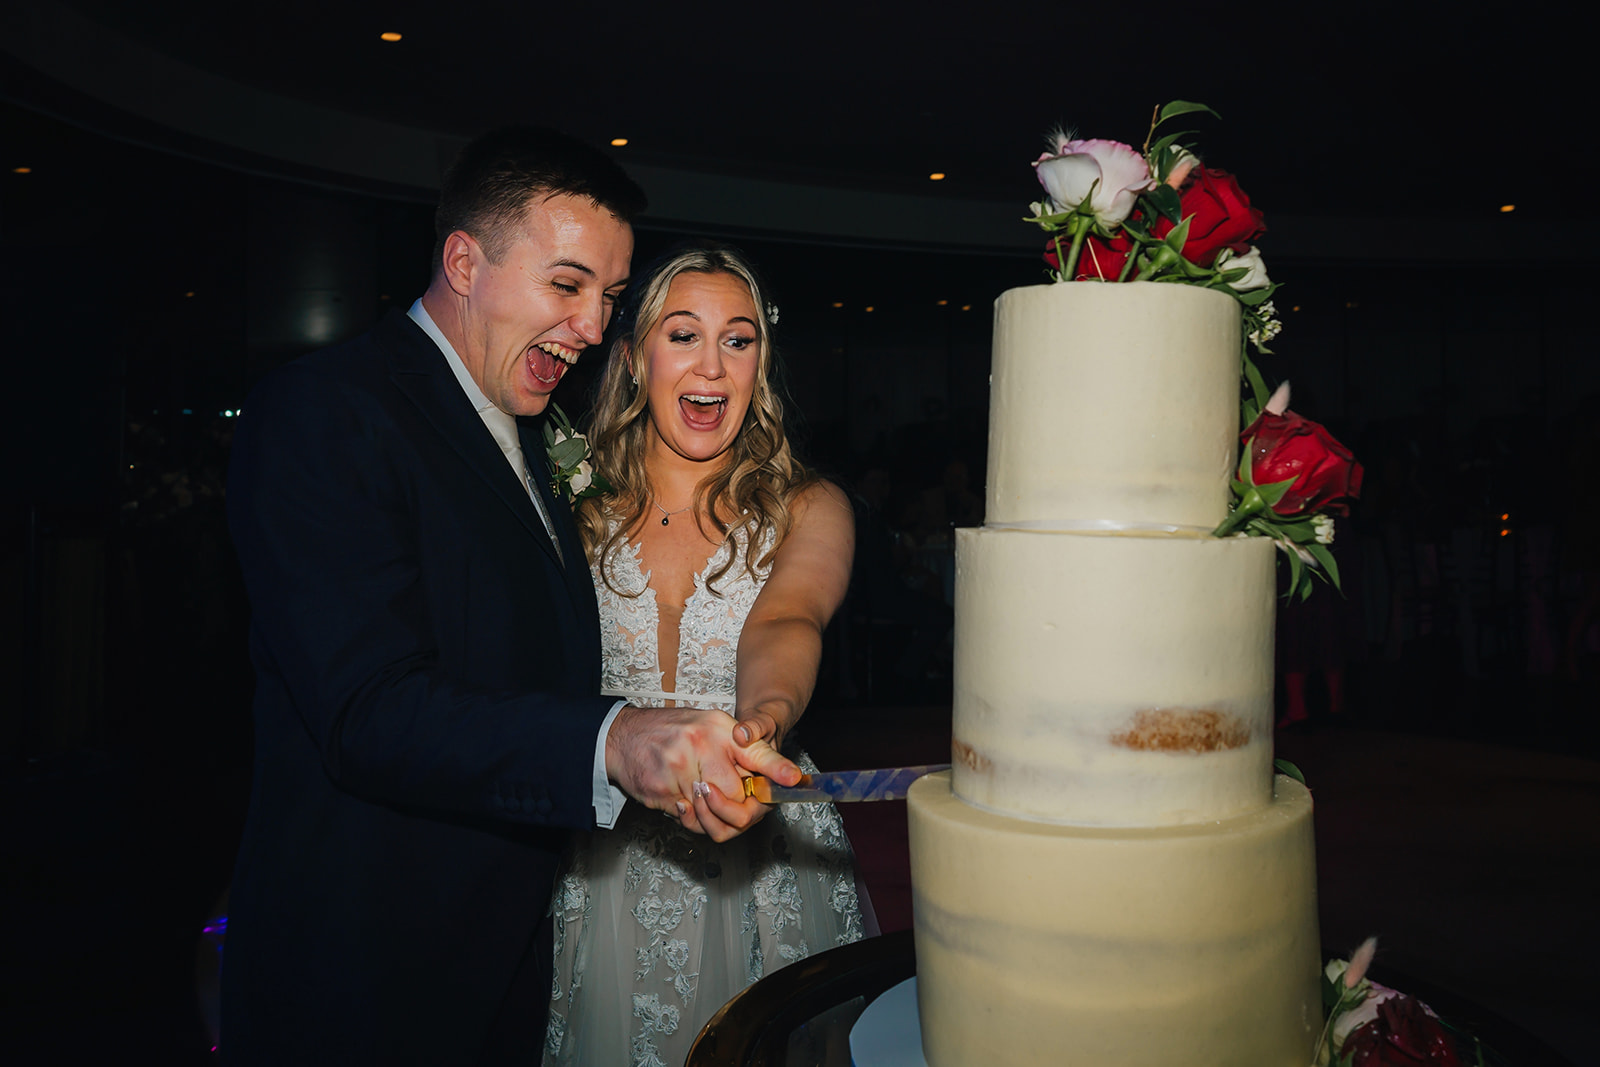 the newly-weds cut their wedding cake